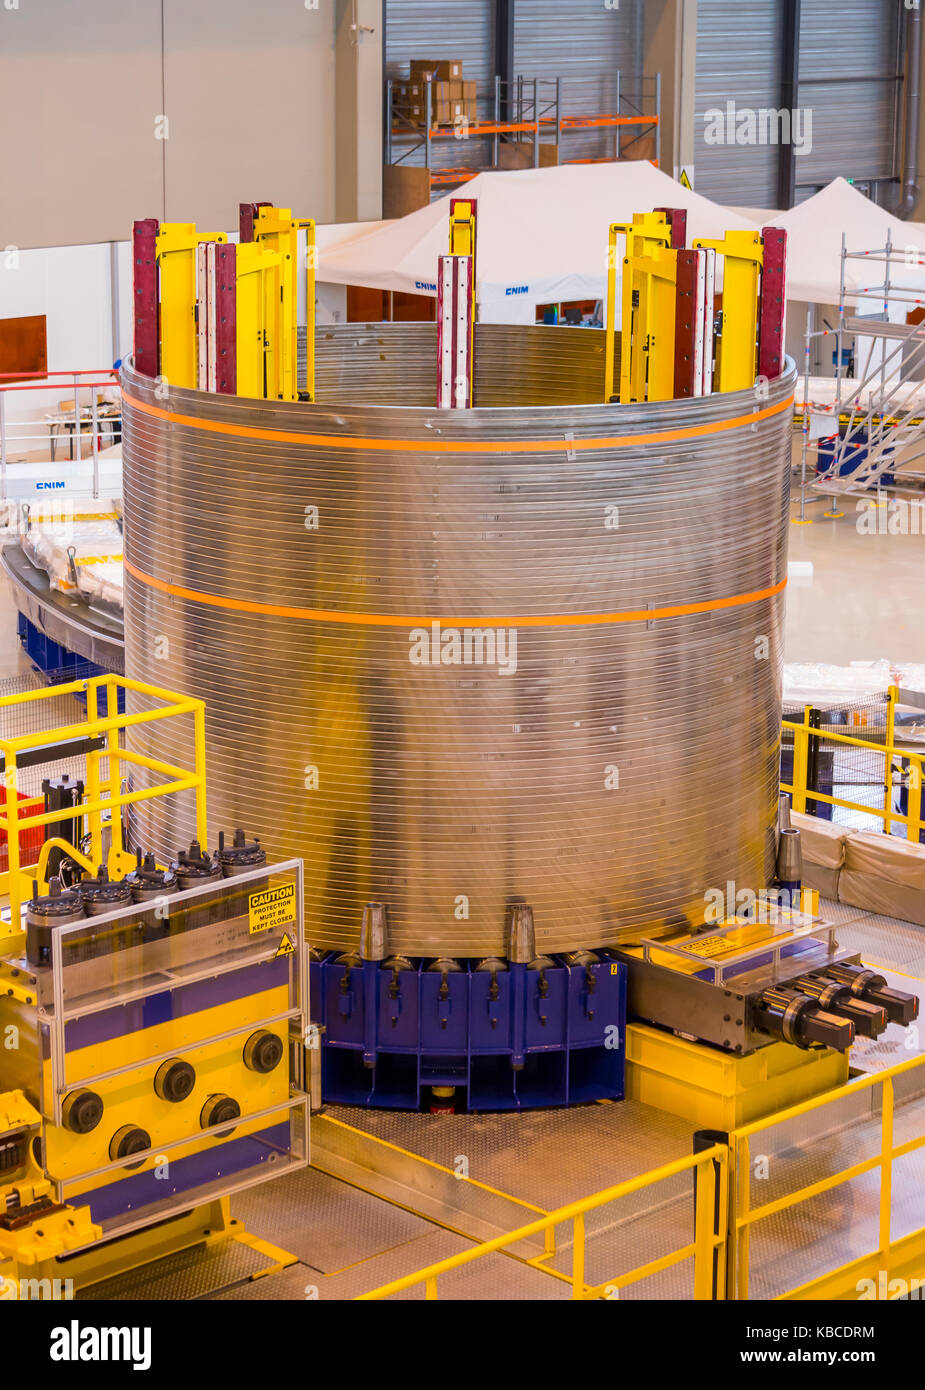 PROVENCE, FRANCE - ITER PF Coils Winding facility building, ITER, International Fusion Energy Organization. Conductor spool. Stock Photo